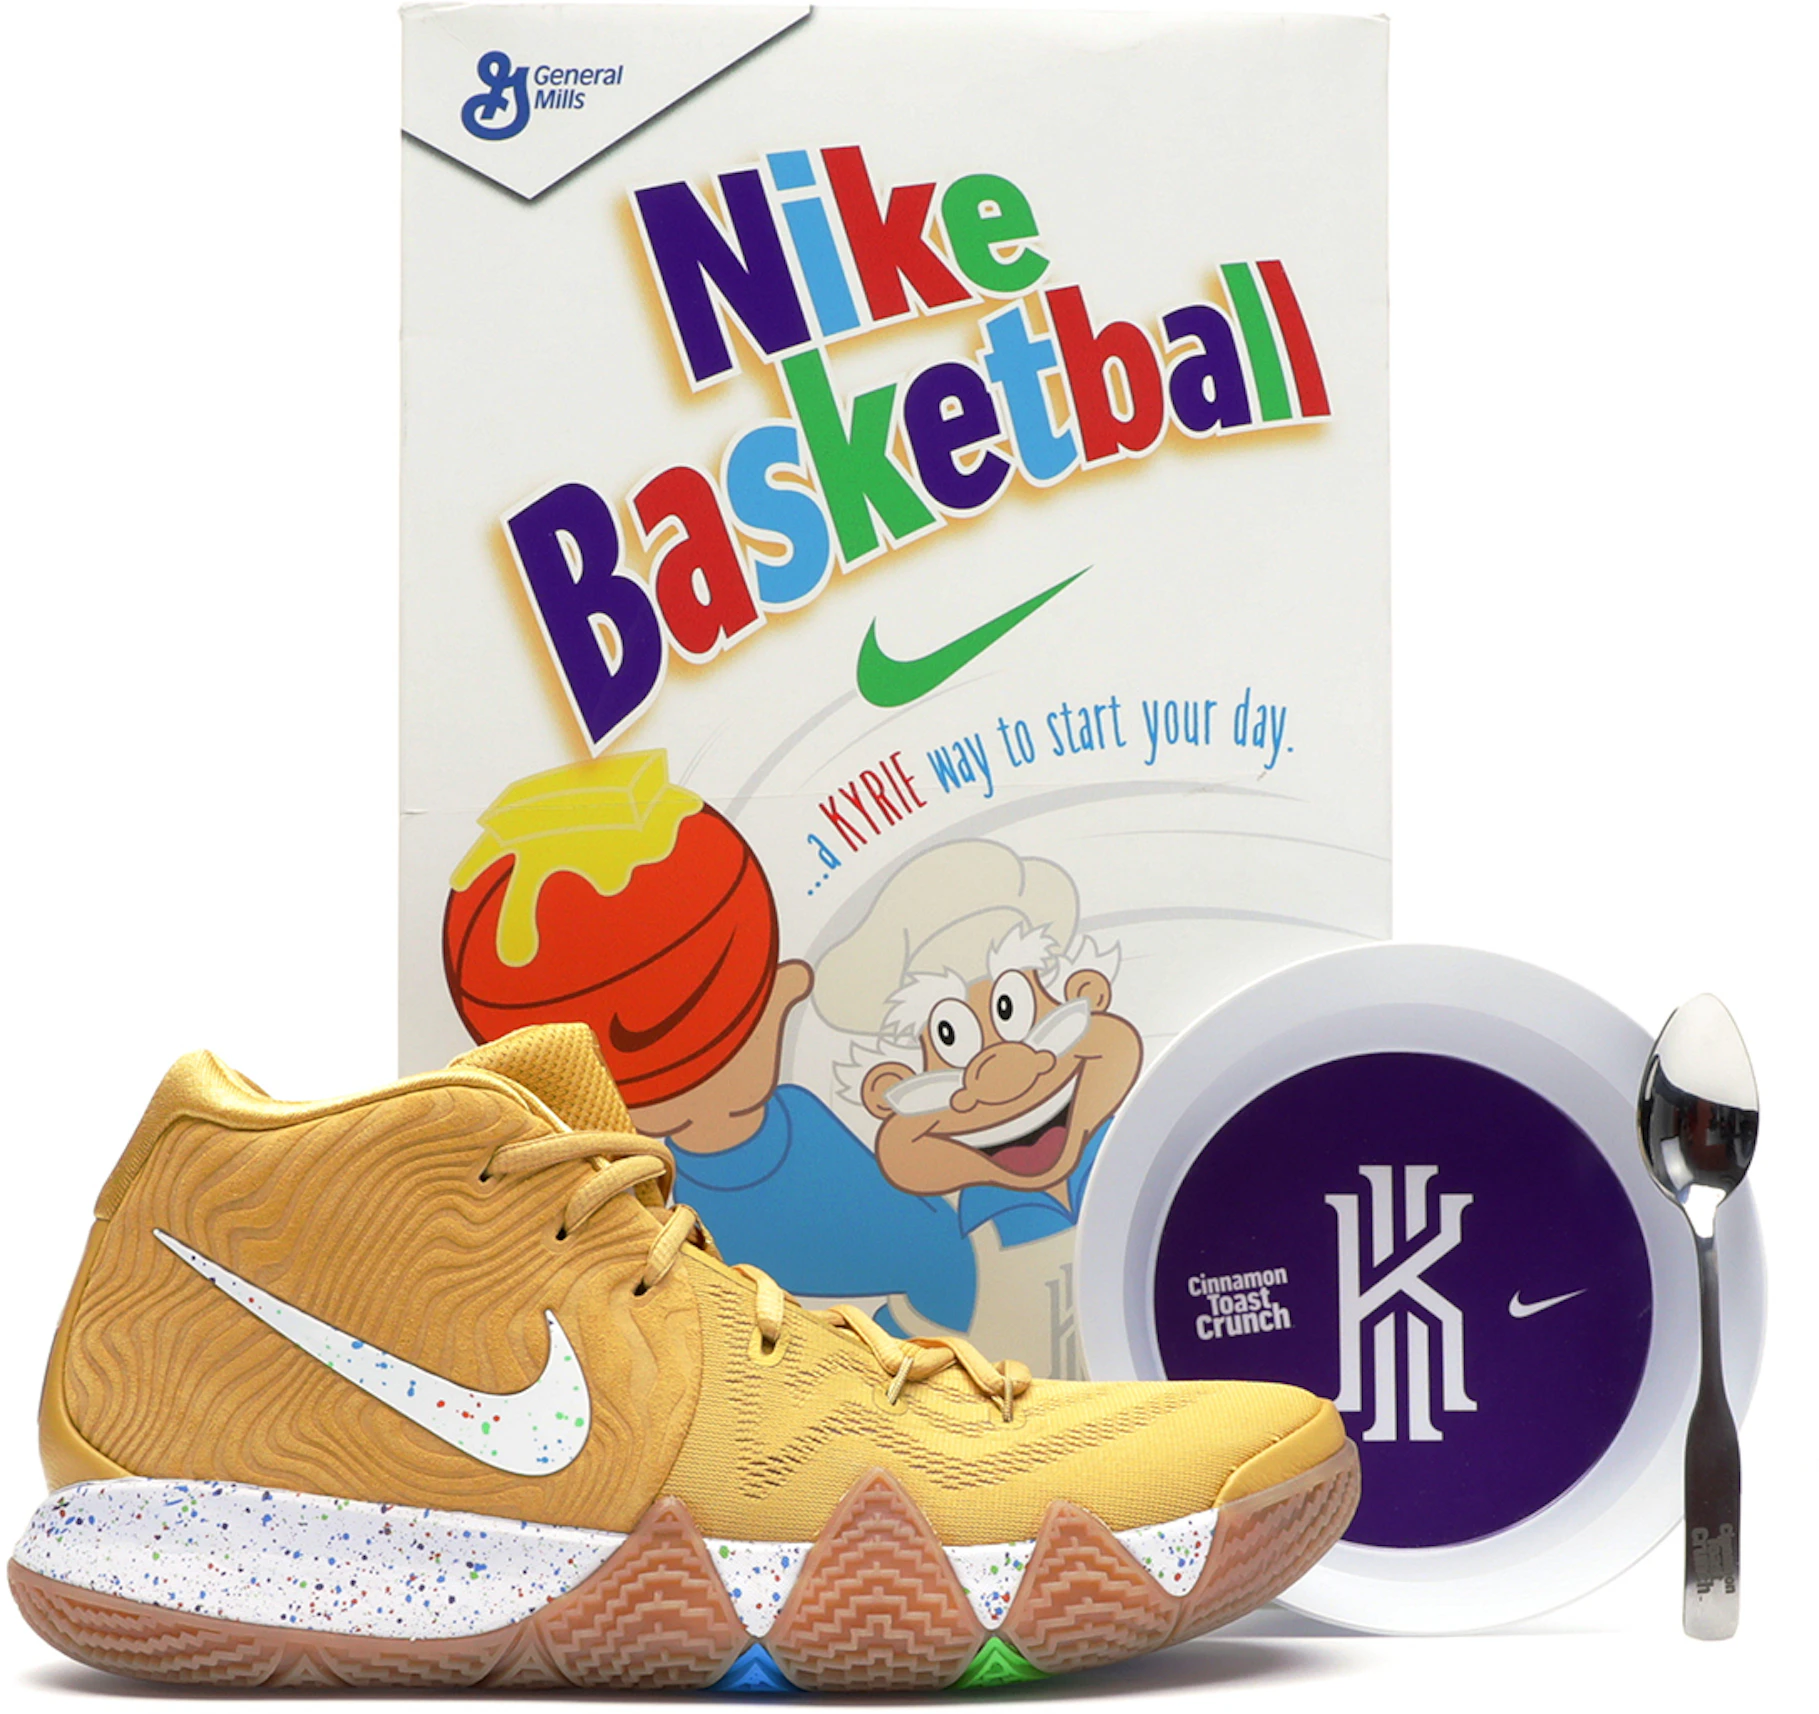 Nike Kyrie 4 Cinnamon Toast Crunch (Special Cereal Box Package) -  BV0426-900 - US